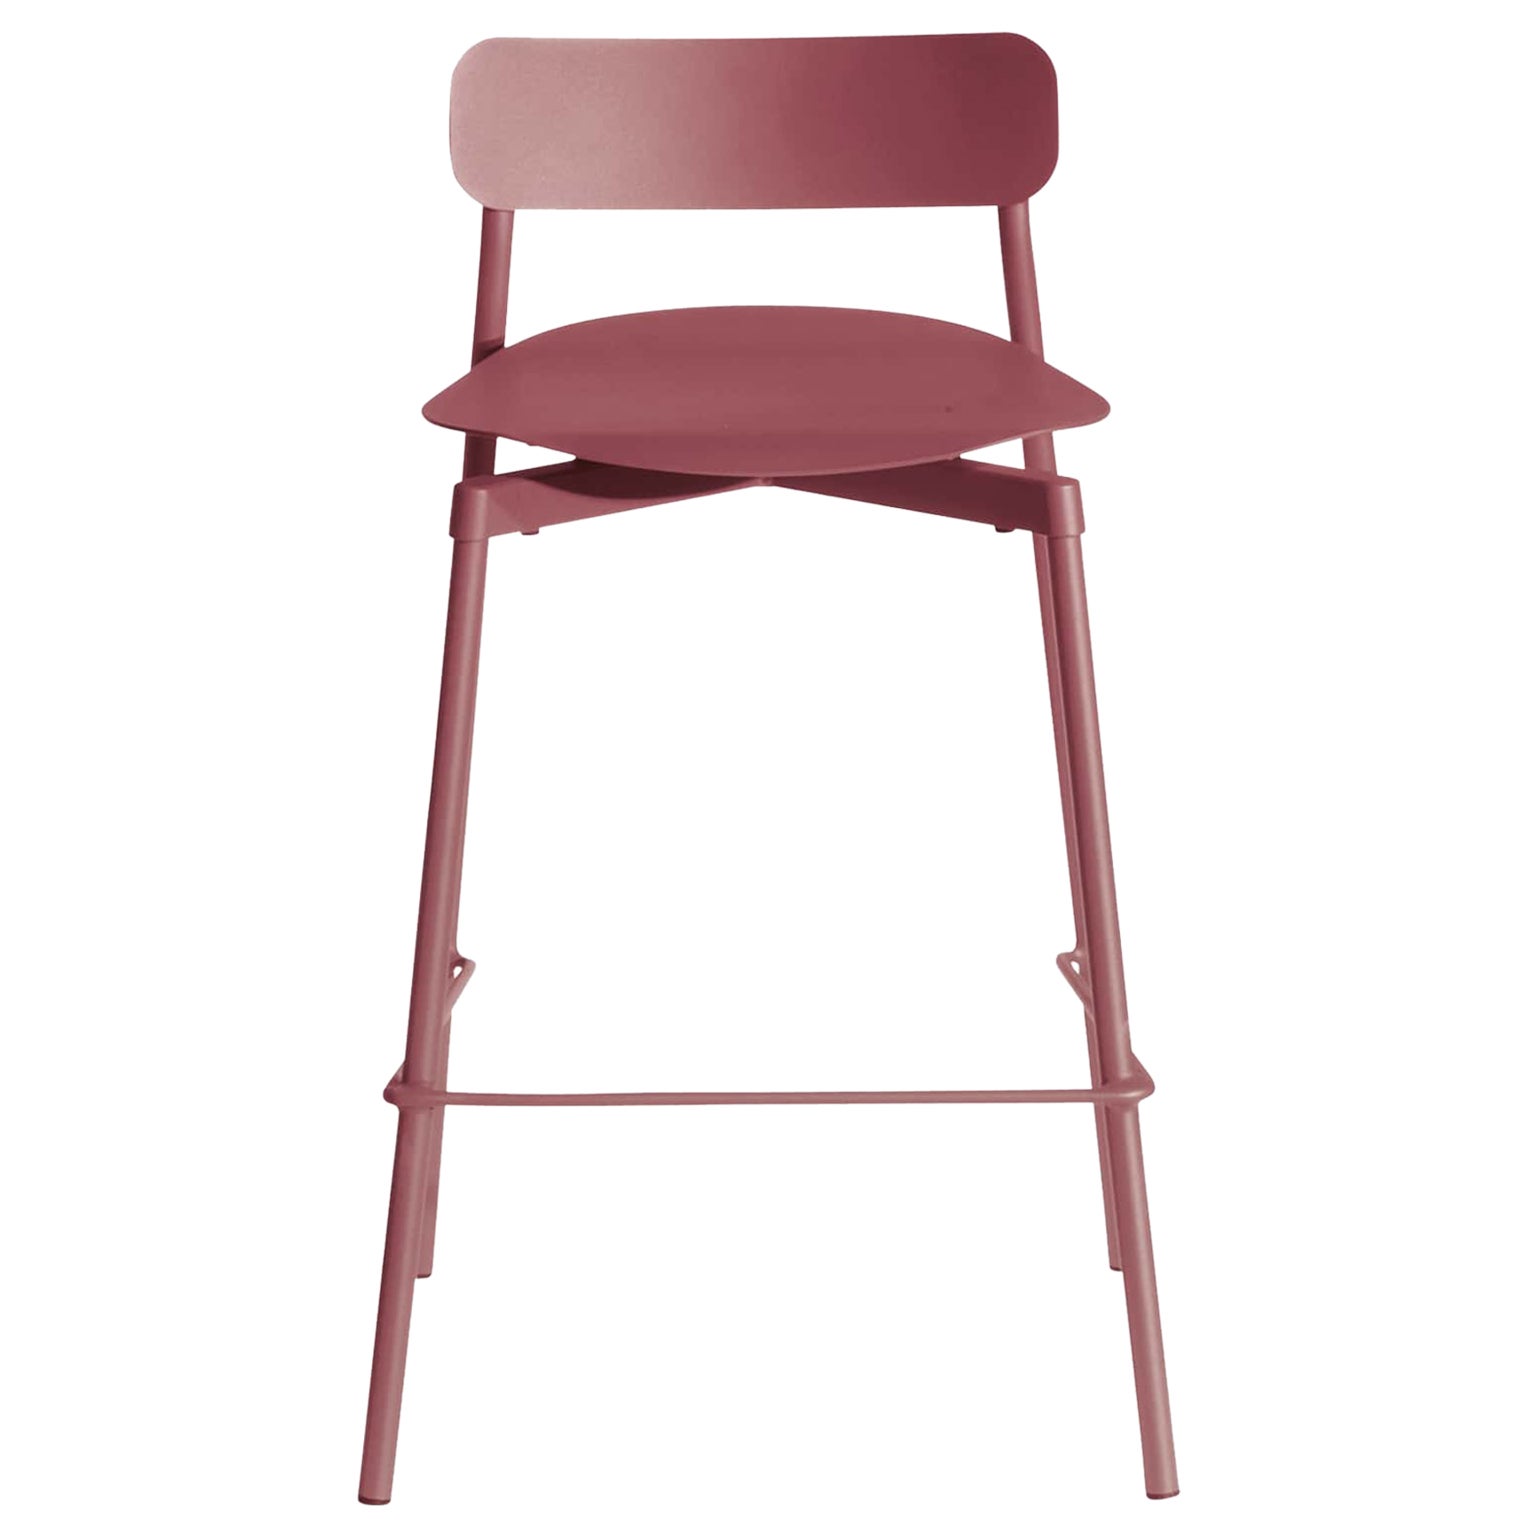 Petite Friture Small Fromme Bar Stool in Brown-Red Aluminium by Tom Chung